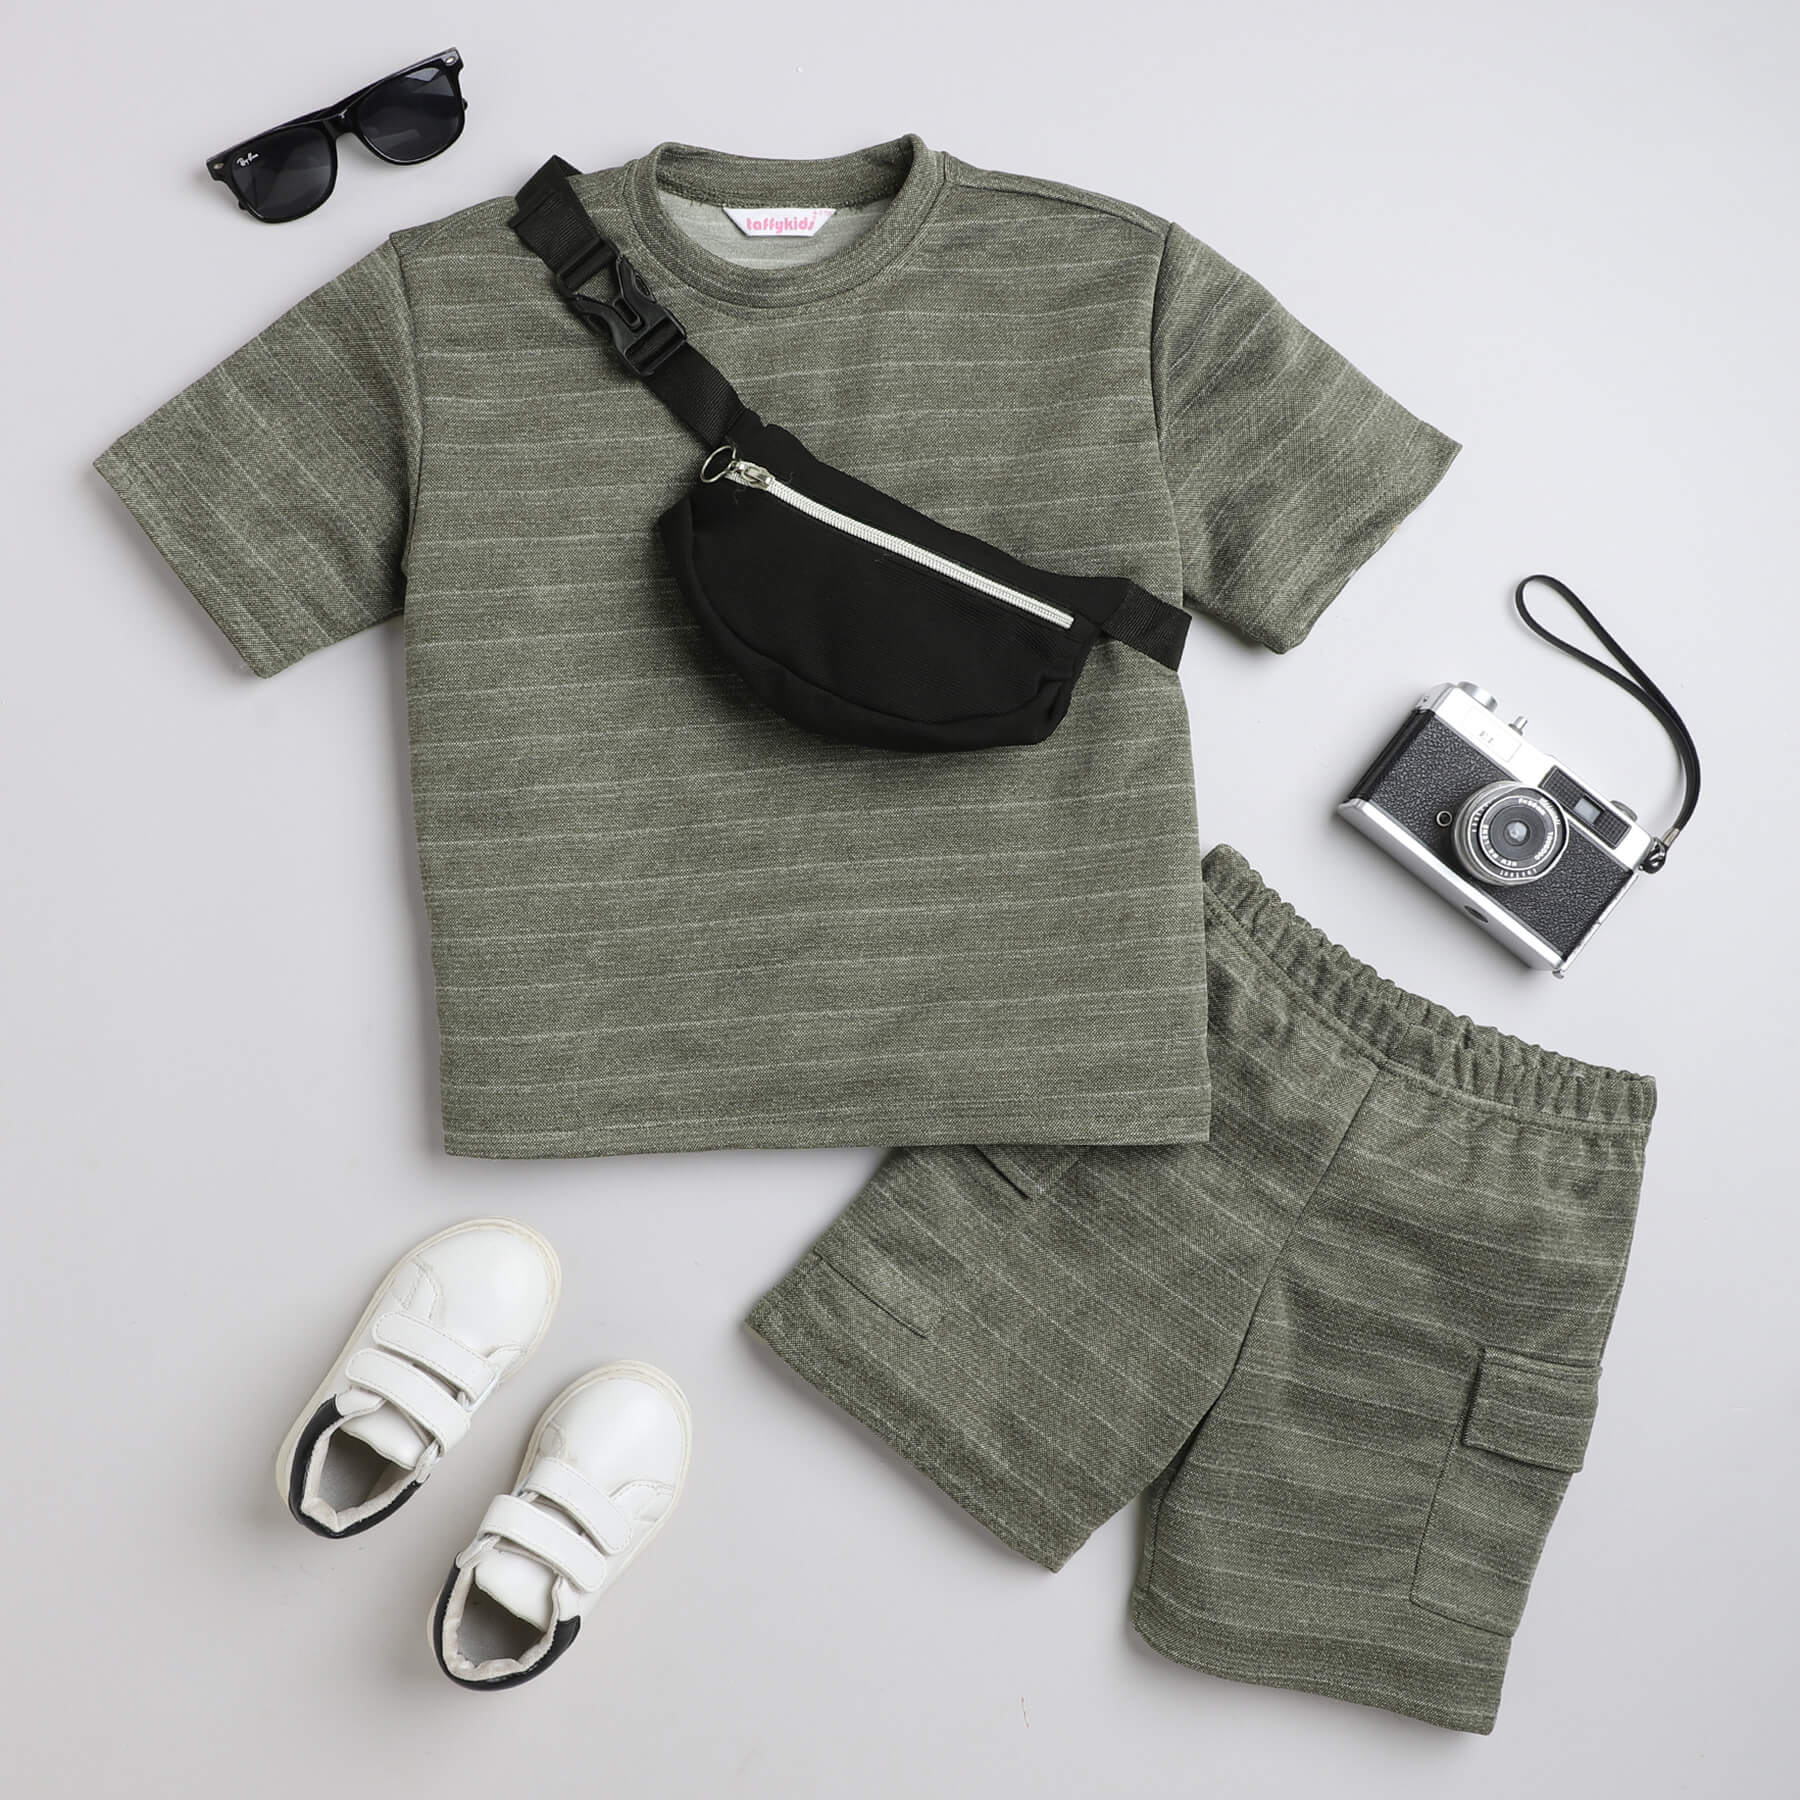 Taffykids Stripes printed half sleeve Oversized tee and Shorts co-ord set with Waist bag-Olive grey